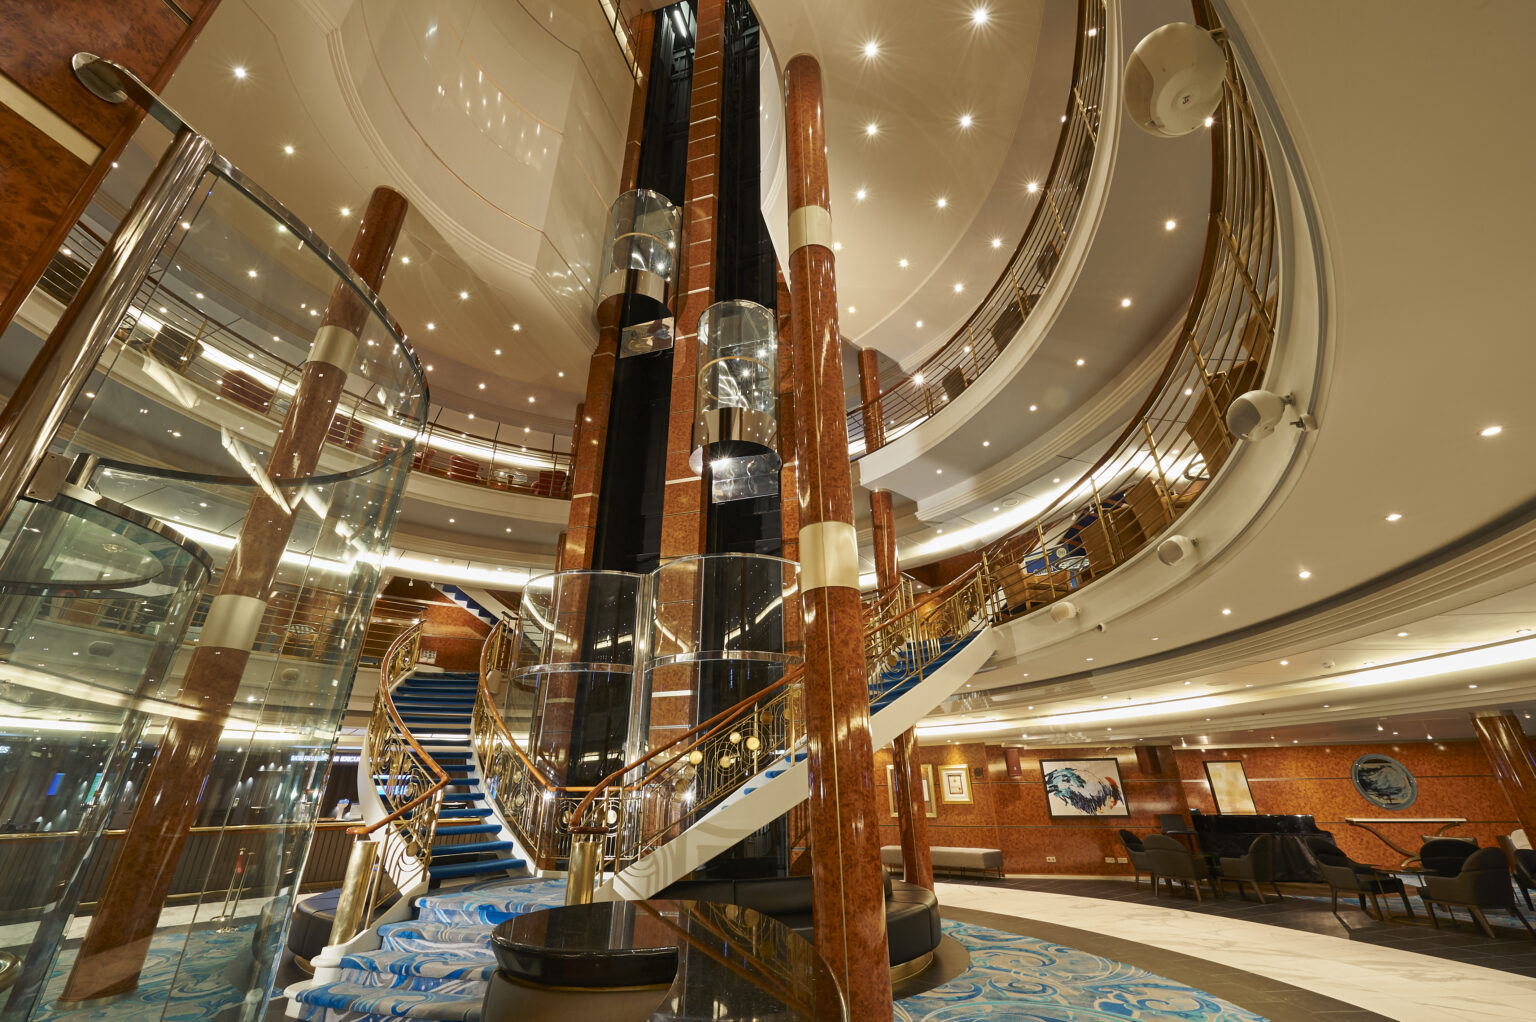 The atrium of the Norwegian Sun with staircase and elevator.